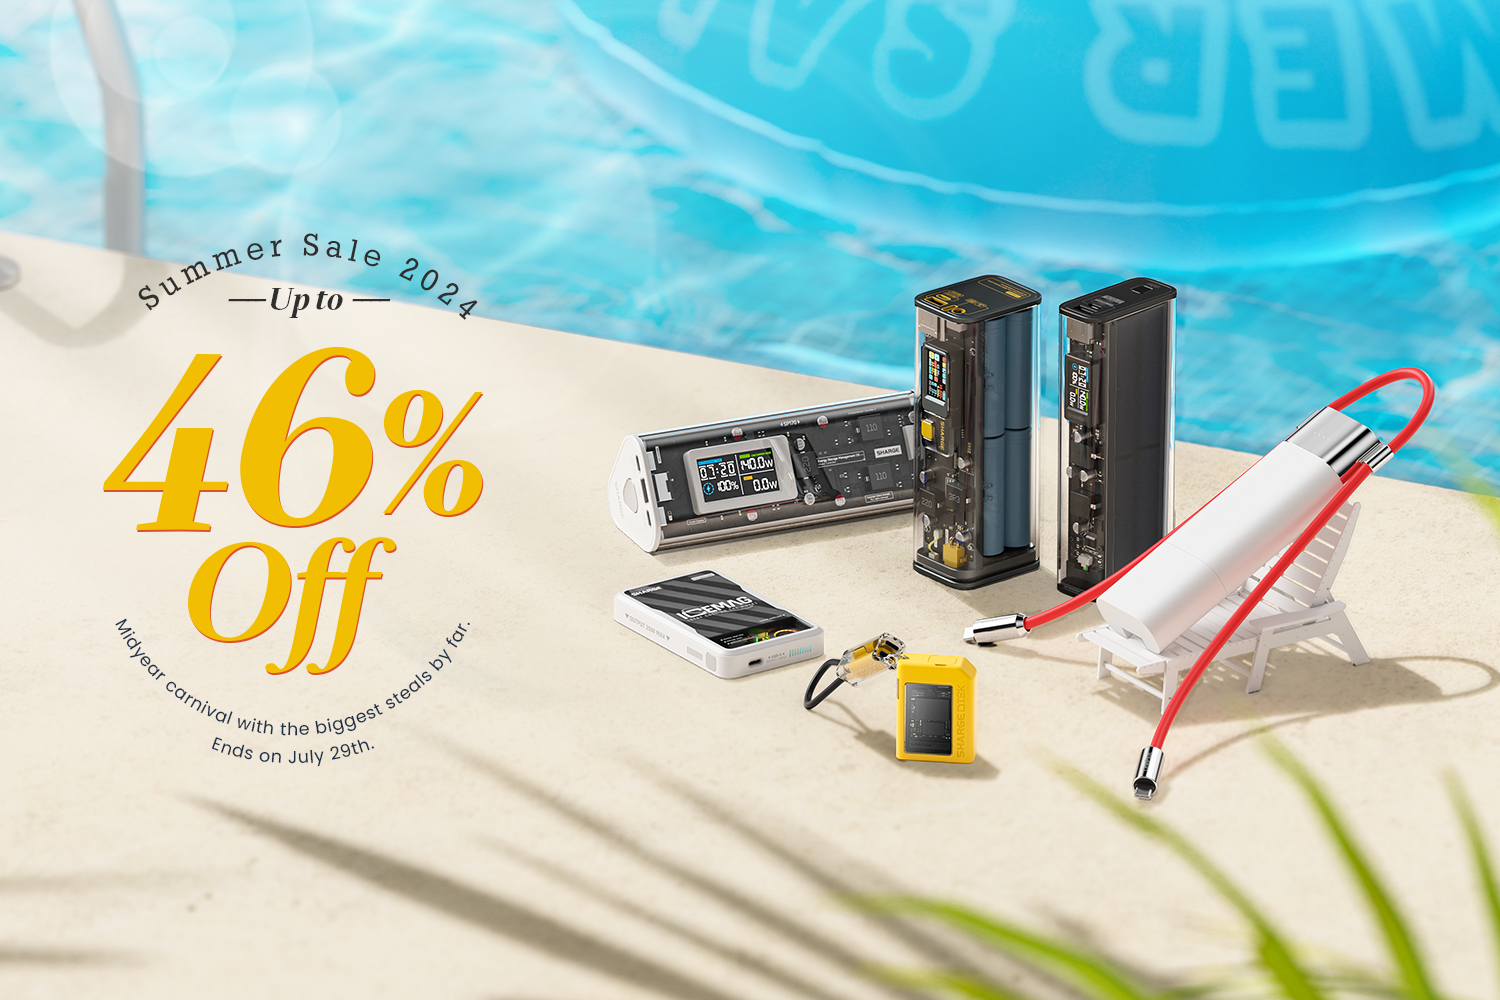 Hot Deals and Cool Gadgets: Sharge's Summer Sale Event Is Here!